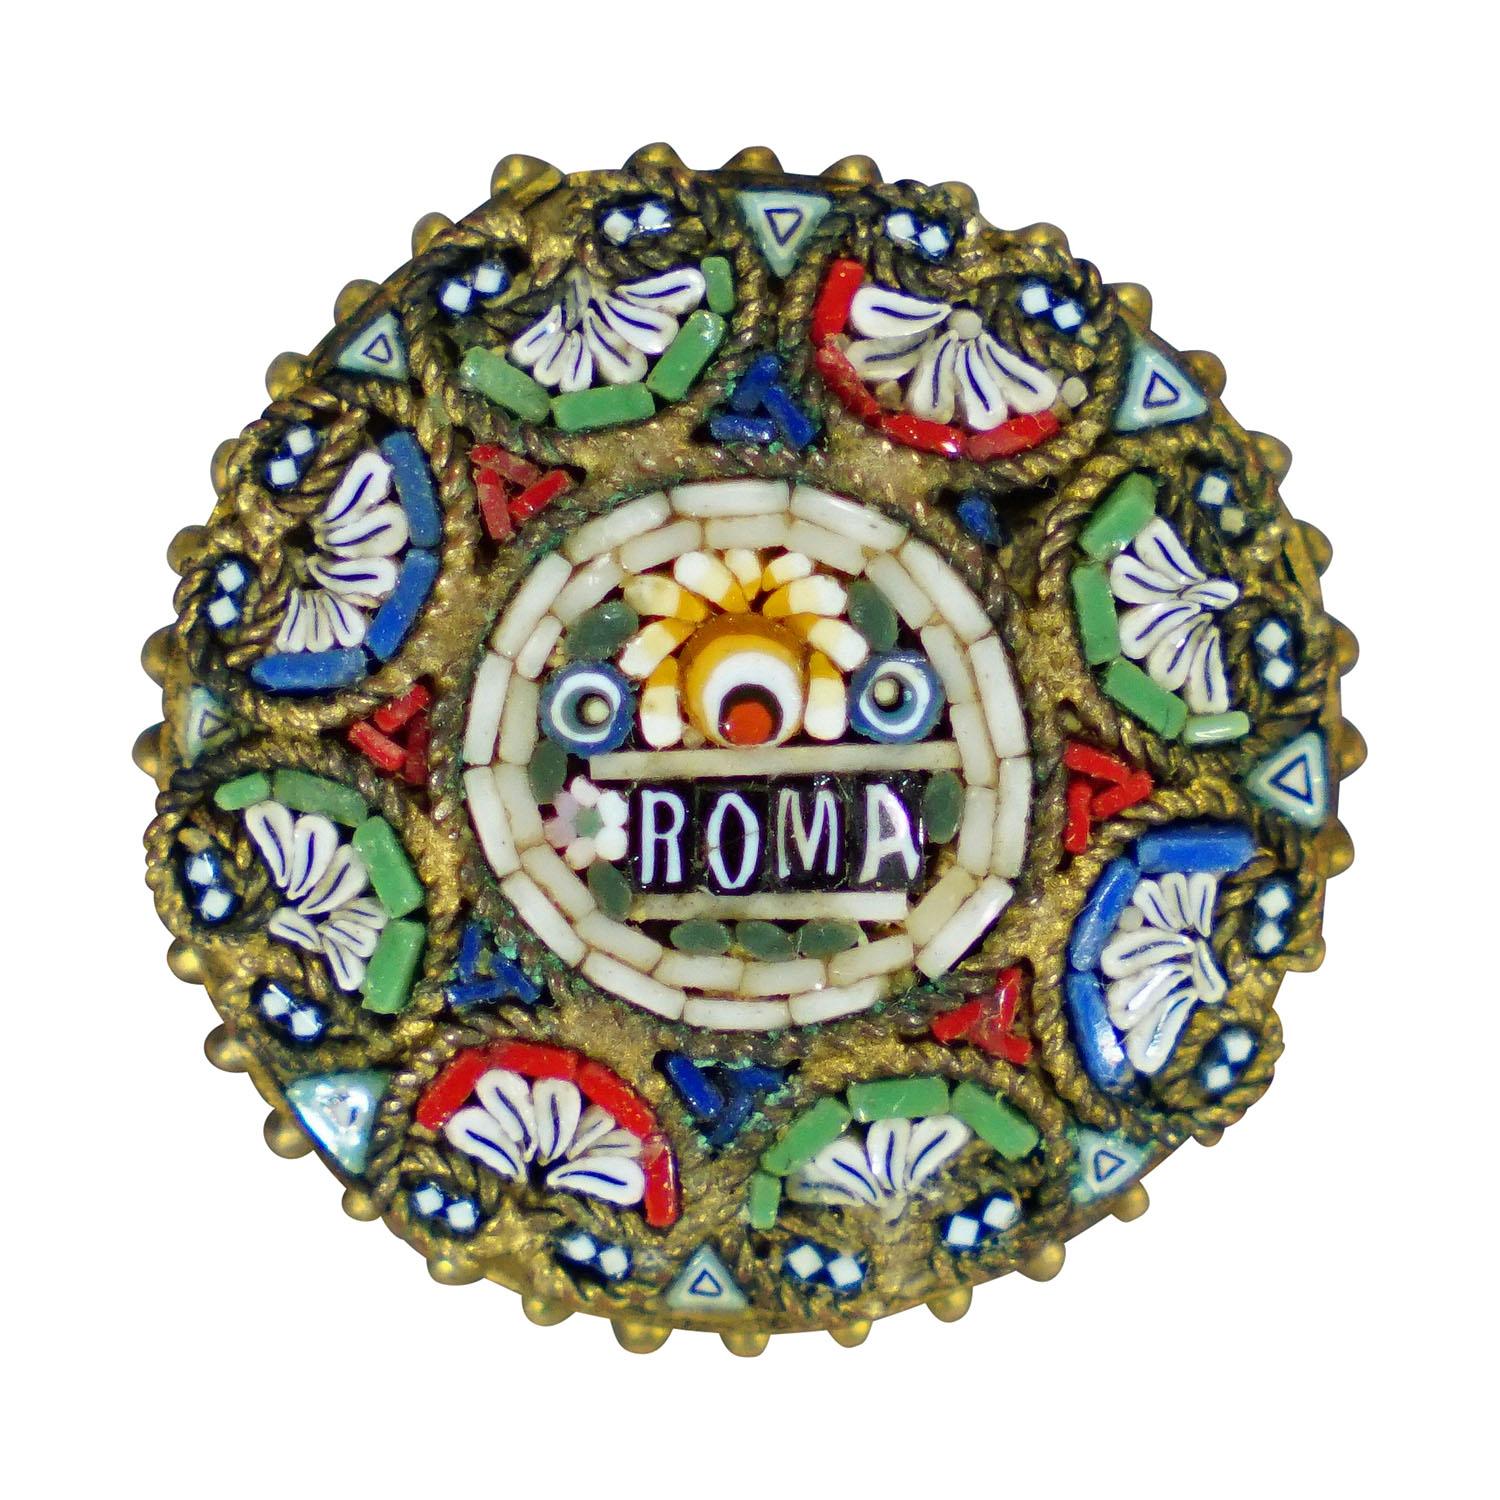 Antique Victorian Micromosaic Brooch with Gilded Framing, Italy early 20th Century

A Victorian micromosaic brooch with a central floral bouquet motif and the inscription 